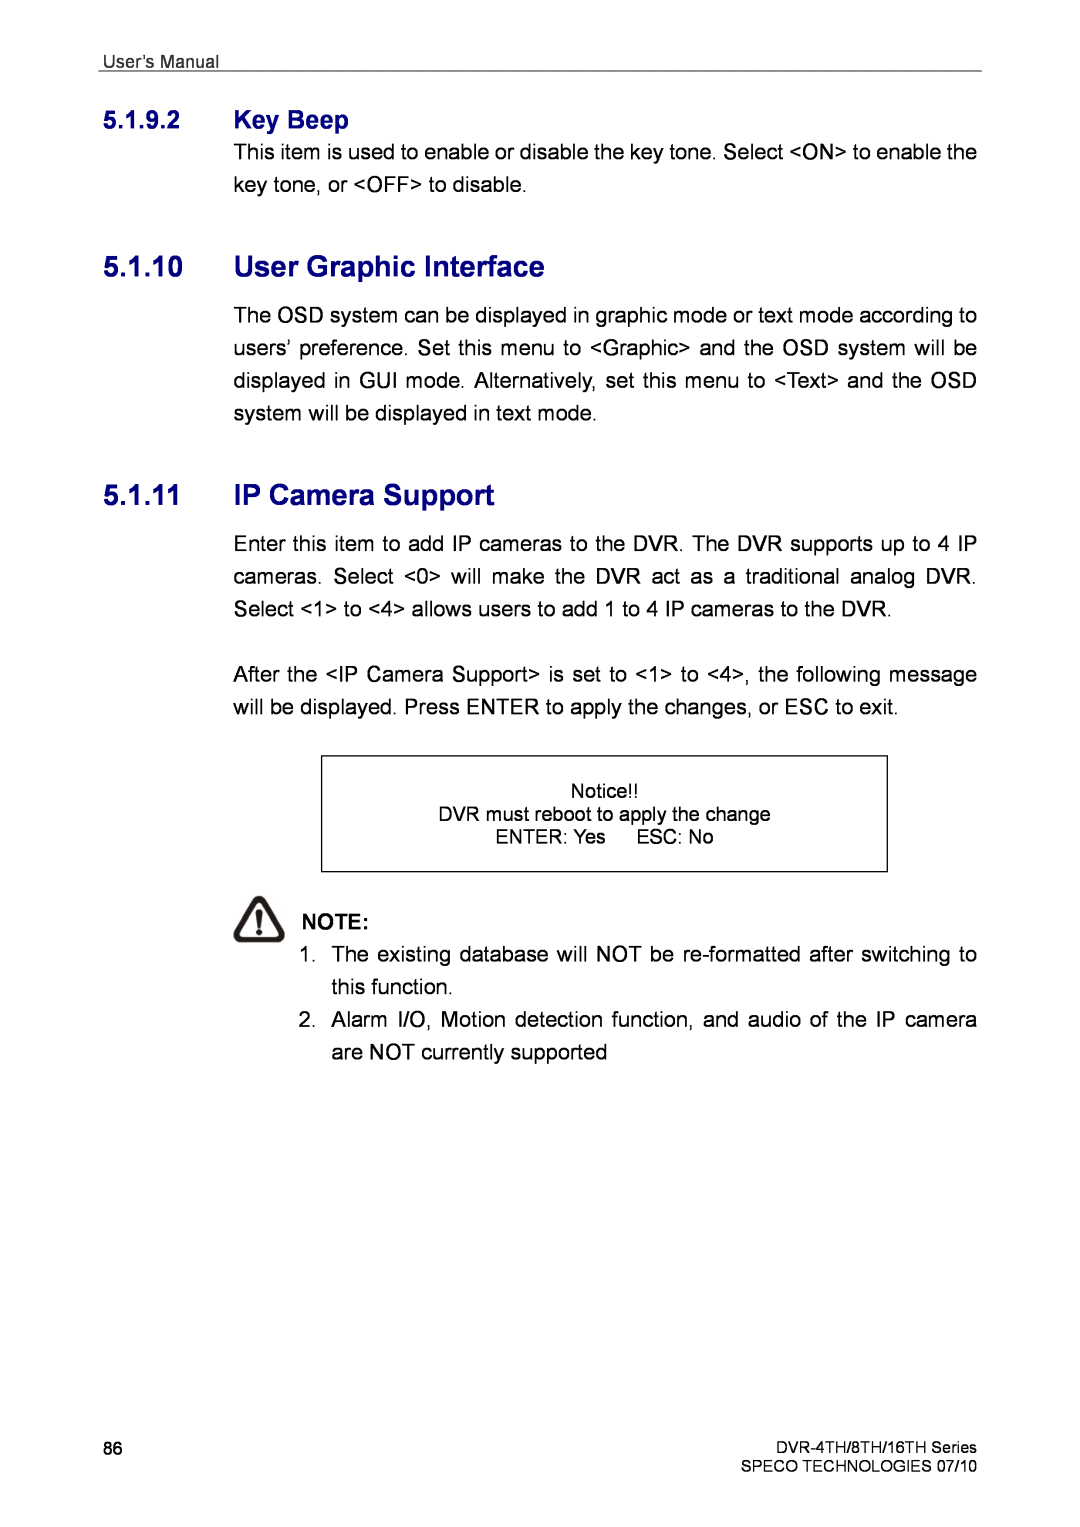 Speco Technologies 8TH, 4TH, 16TH user manual User Graphic Interface, IP Camera Support, Key Beep 